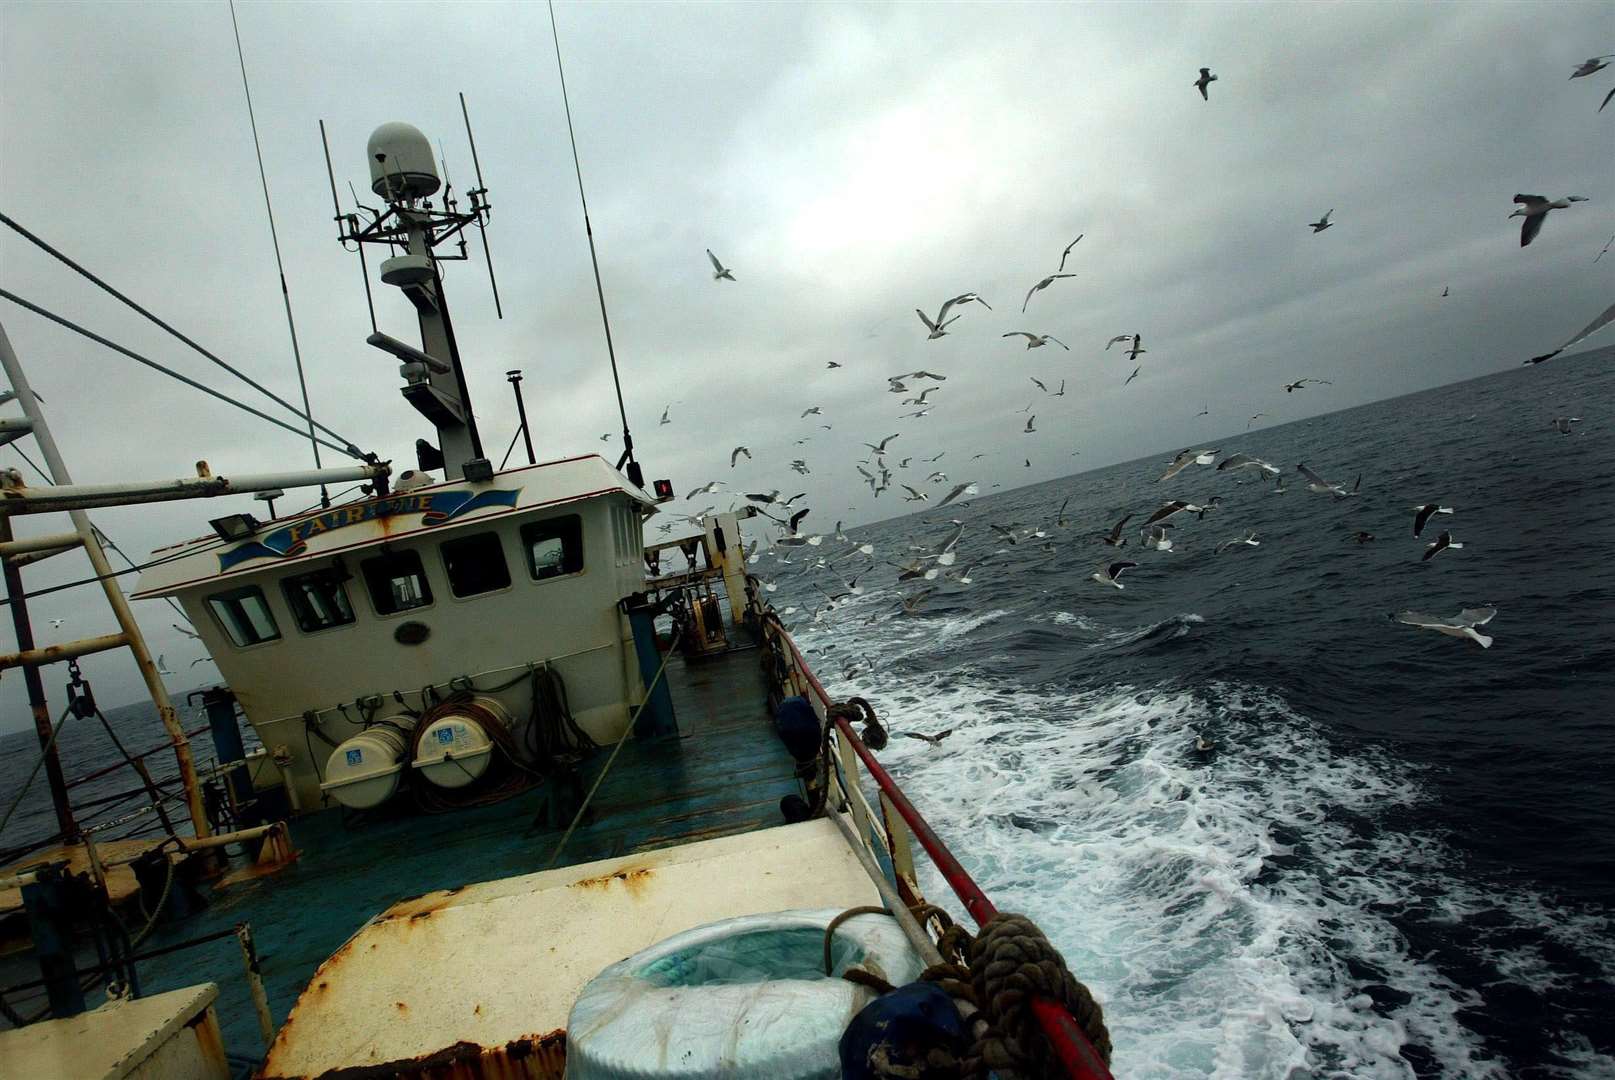 Fishermen’s representative Barrie Deas said any new environmental measures must take fishing communities into account (Maurice McDonald/PA)